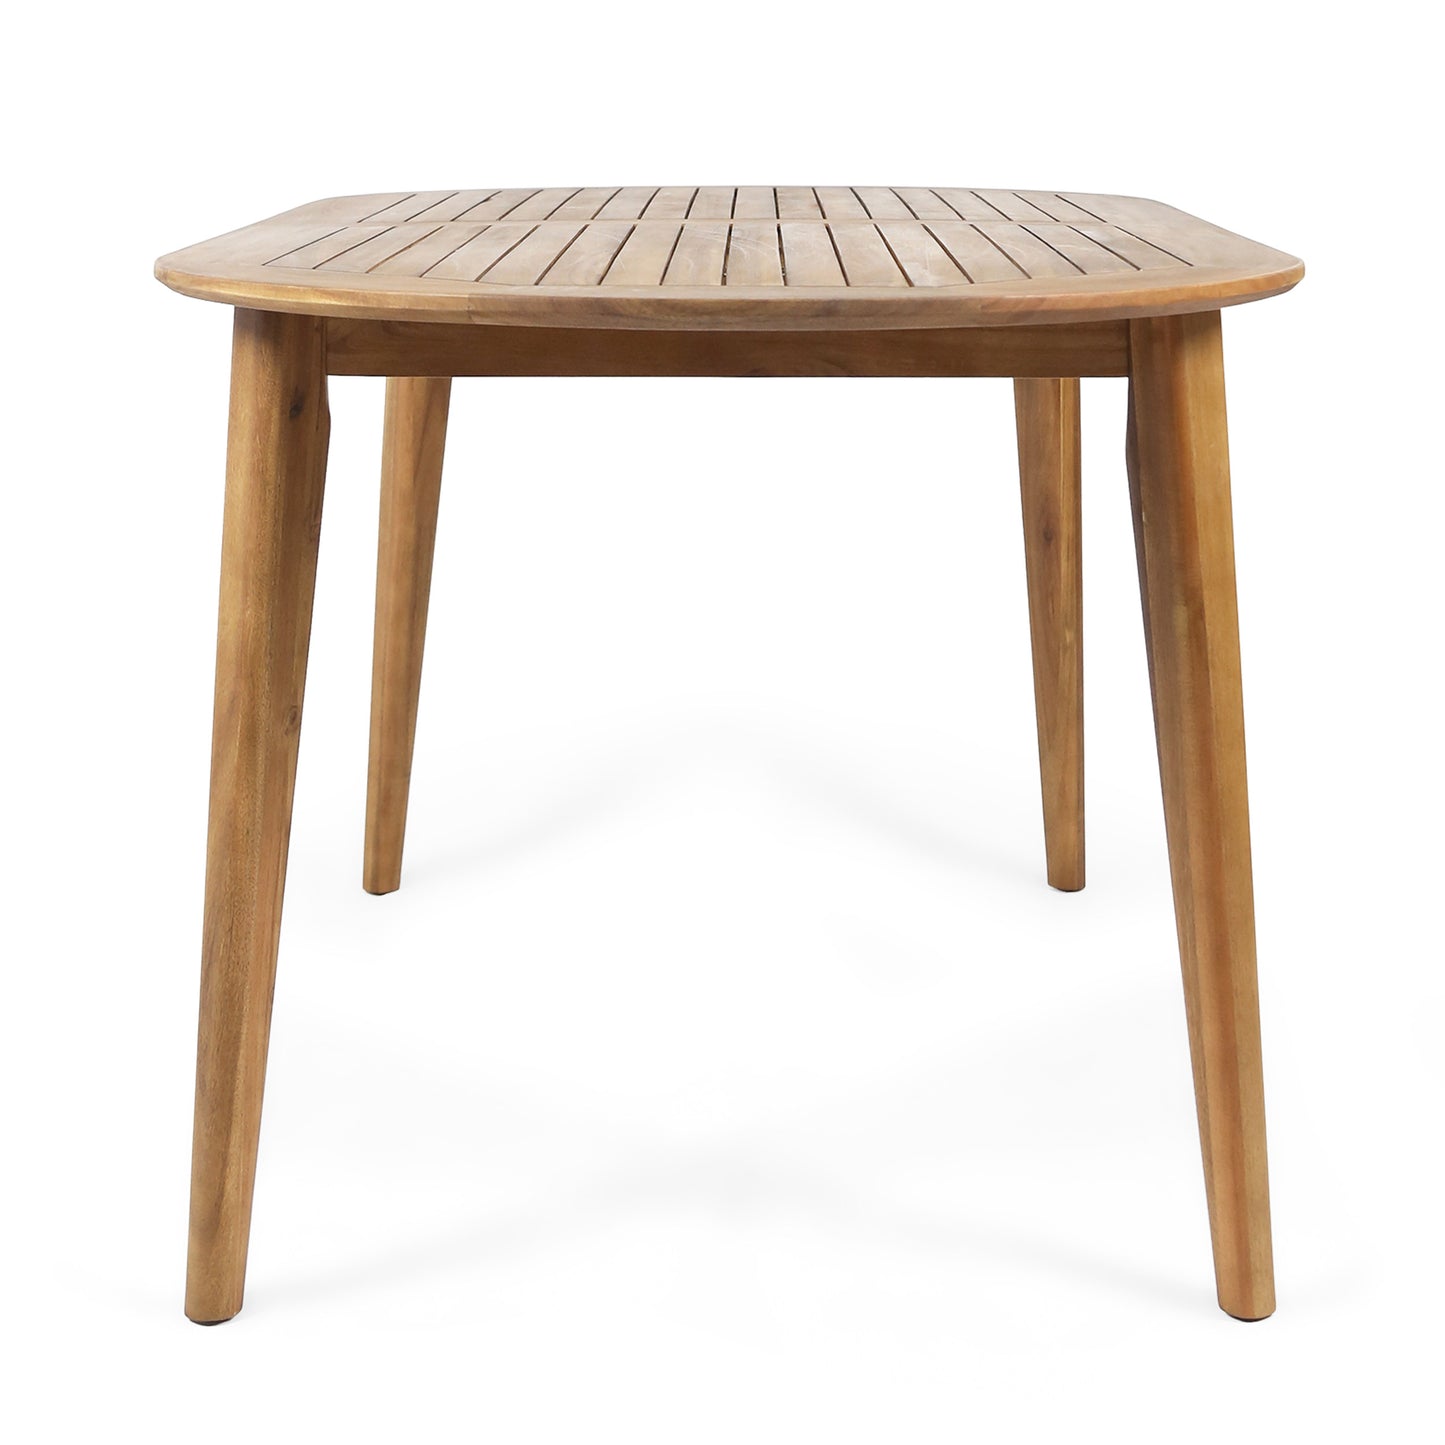 Stanford Outdoor Rustic Slat-Top Acacia Wood Oval Dining Table with Tapered Legs